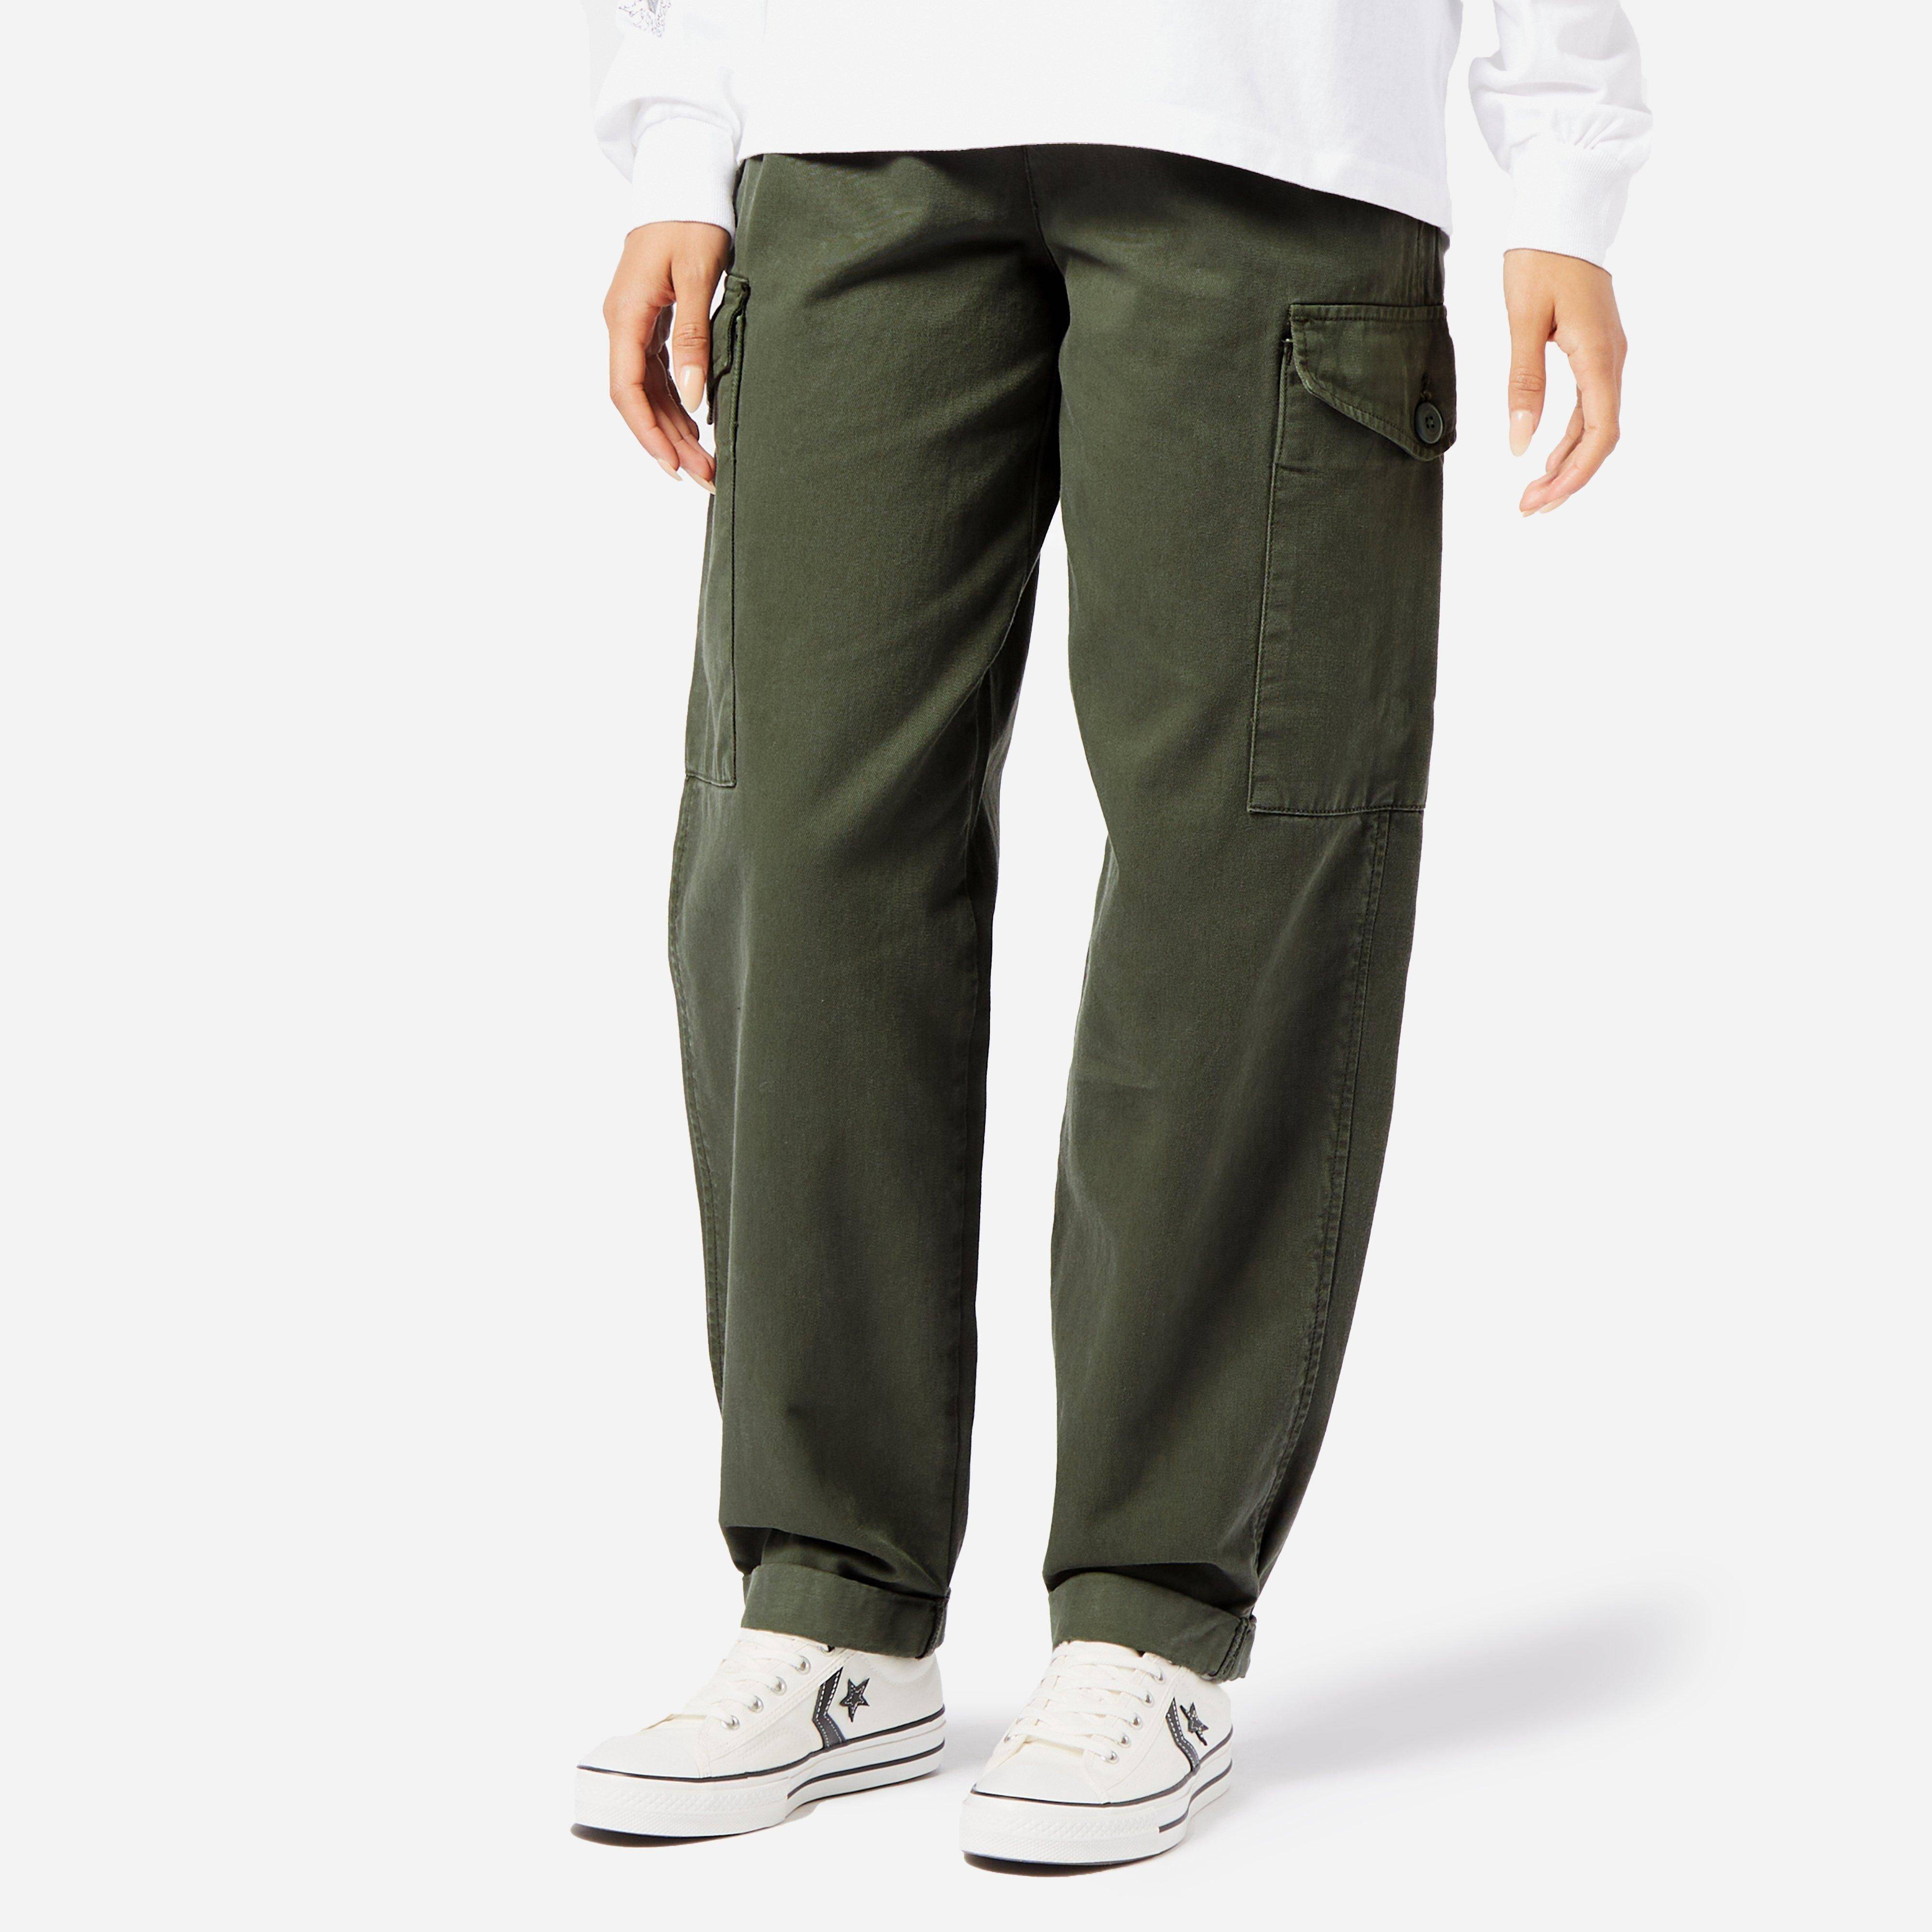 Carhartt WIP Collins Pant - Green | The Sole Supplier